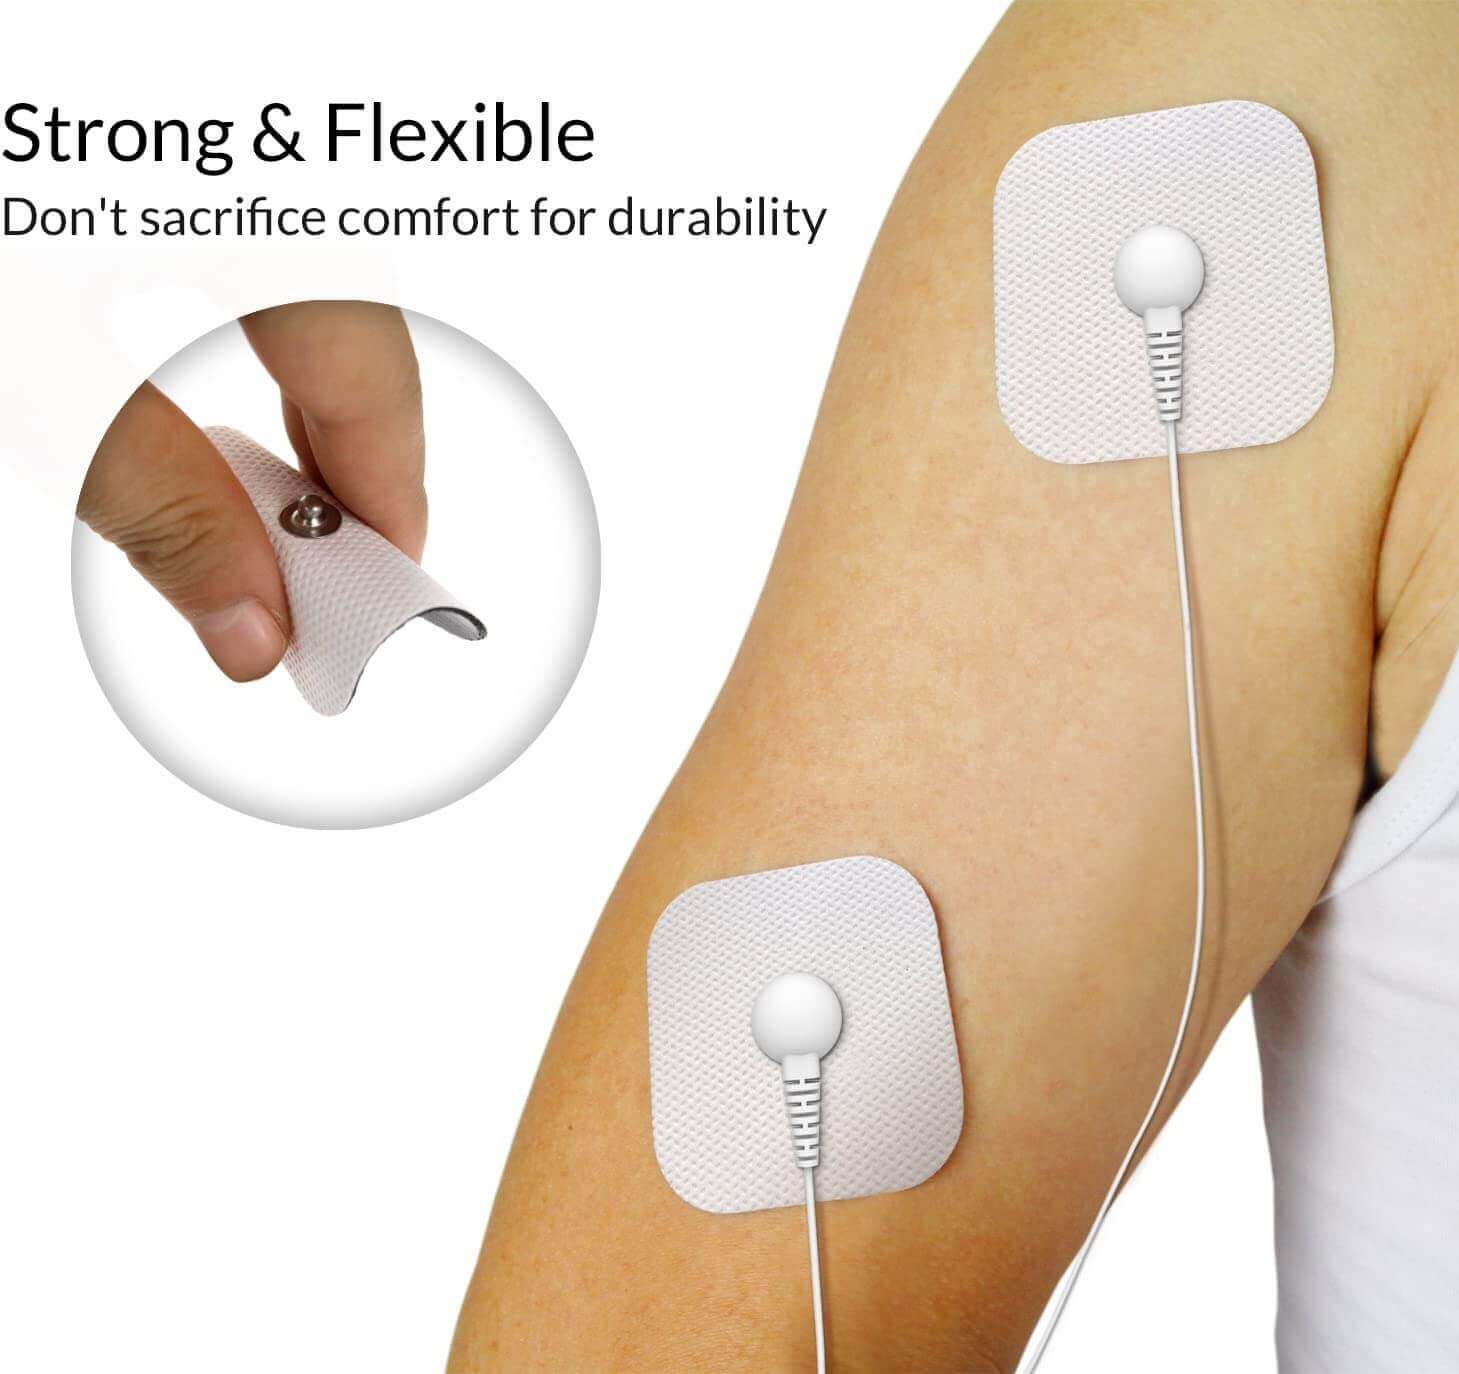 DONECO Electrodes Pads - 2in Square TENS Unit - Snap On Pads 24 Pcs for TENS Therapy - strong flexible